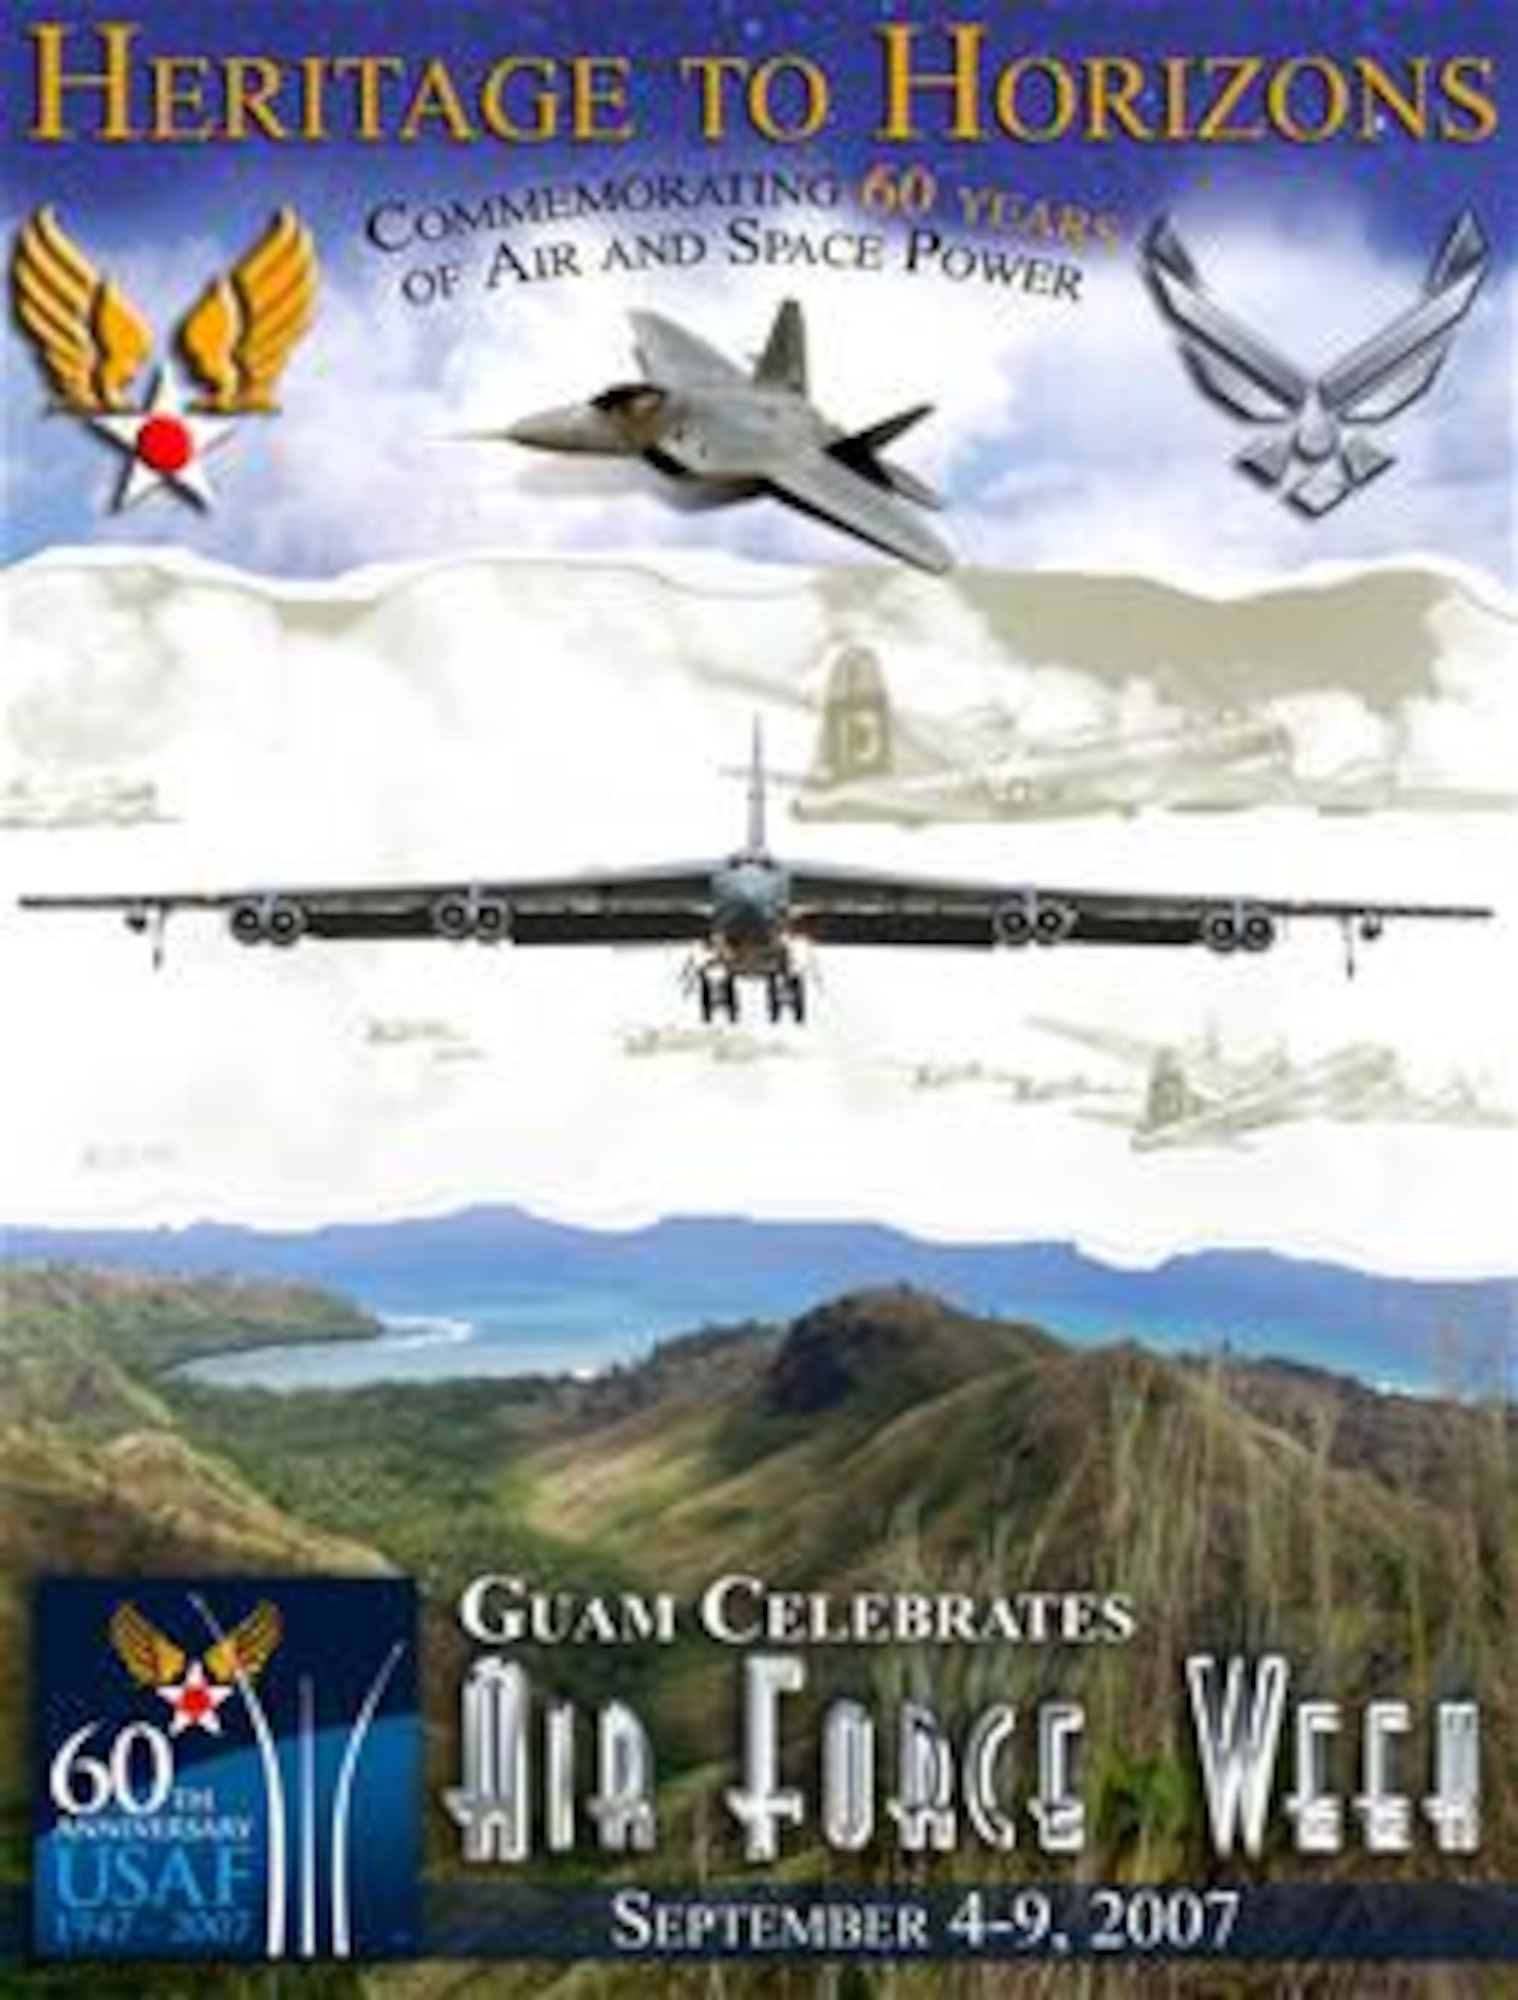 ANDERSEN AIR FORCE BASE, Guam - Guam's Air Force week is from Sept. 4 to Sept 9, 2007.  (Graphic by Tech. Sgt. Brian Bahret/ 36th Wing Public Affairs)